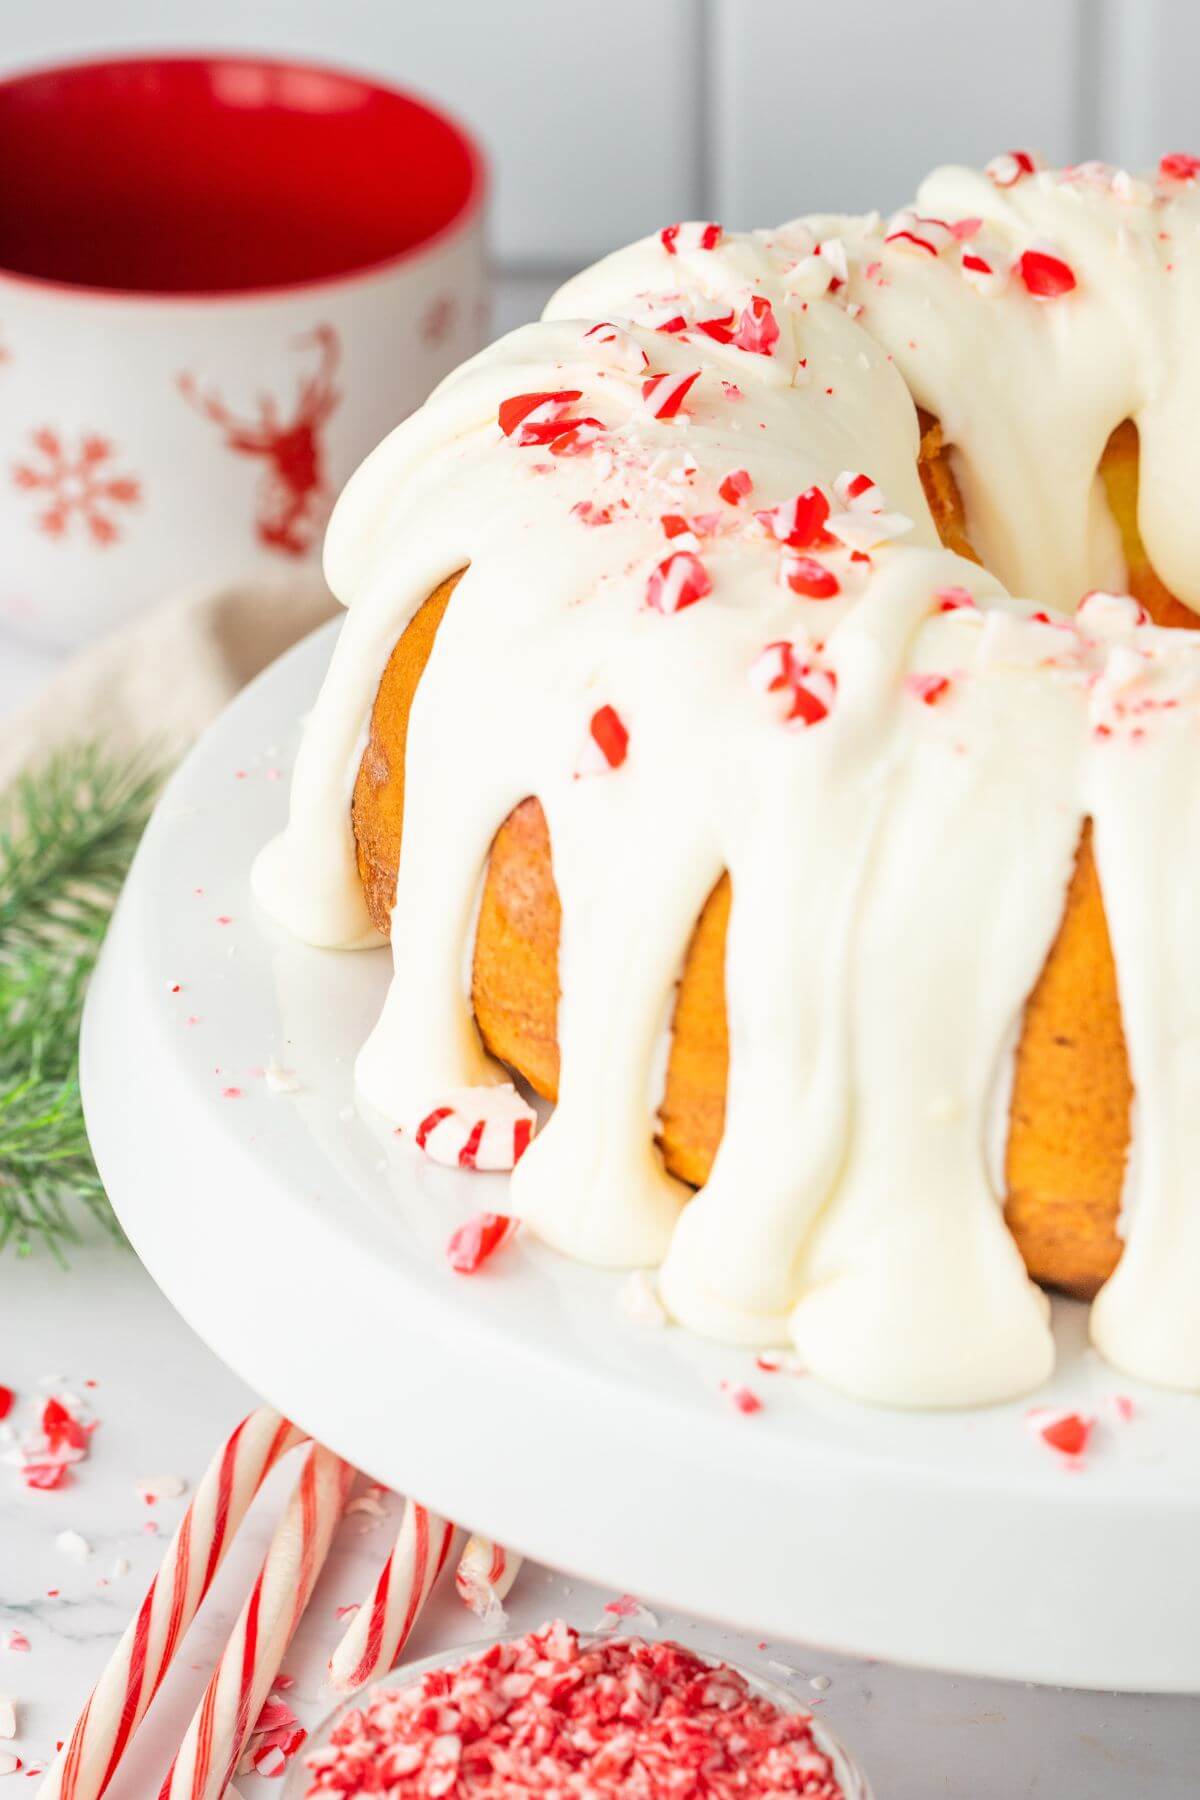 Peppermint Candy Cane Bundt Cake with Peppermint Cream Cheese Frosting shown on platter.